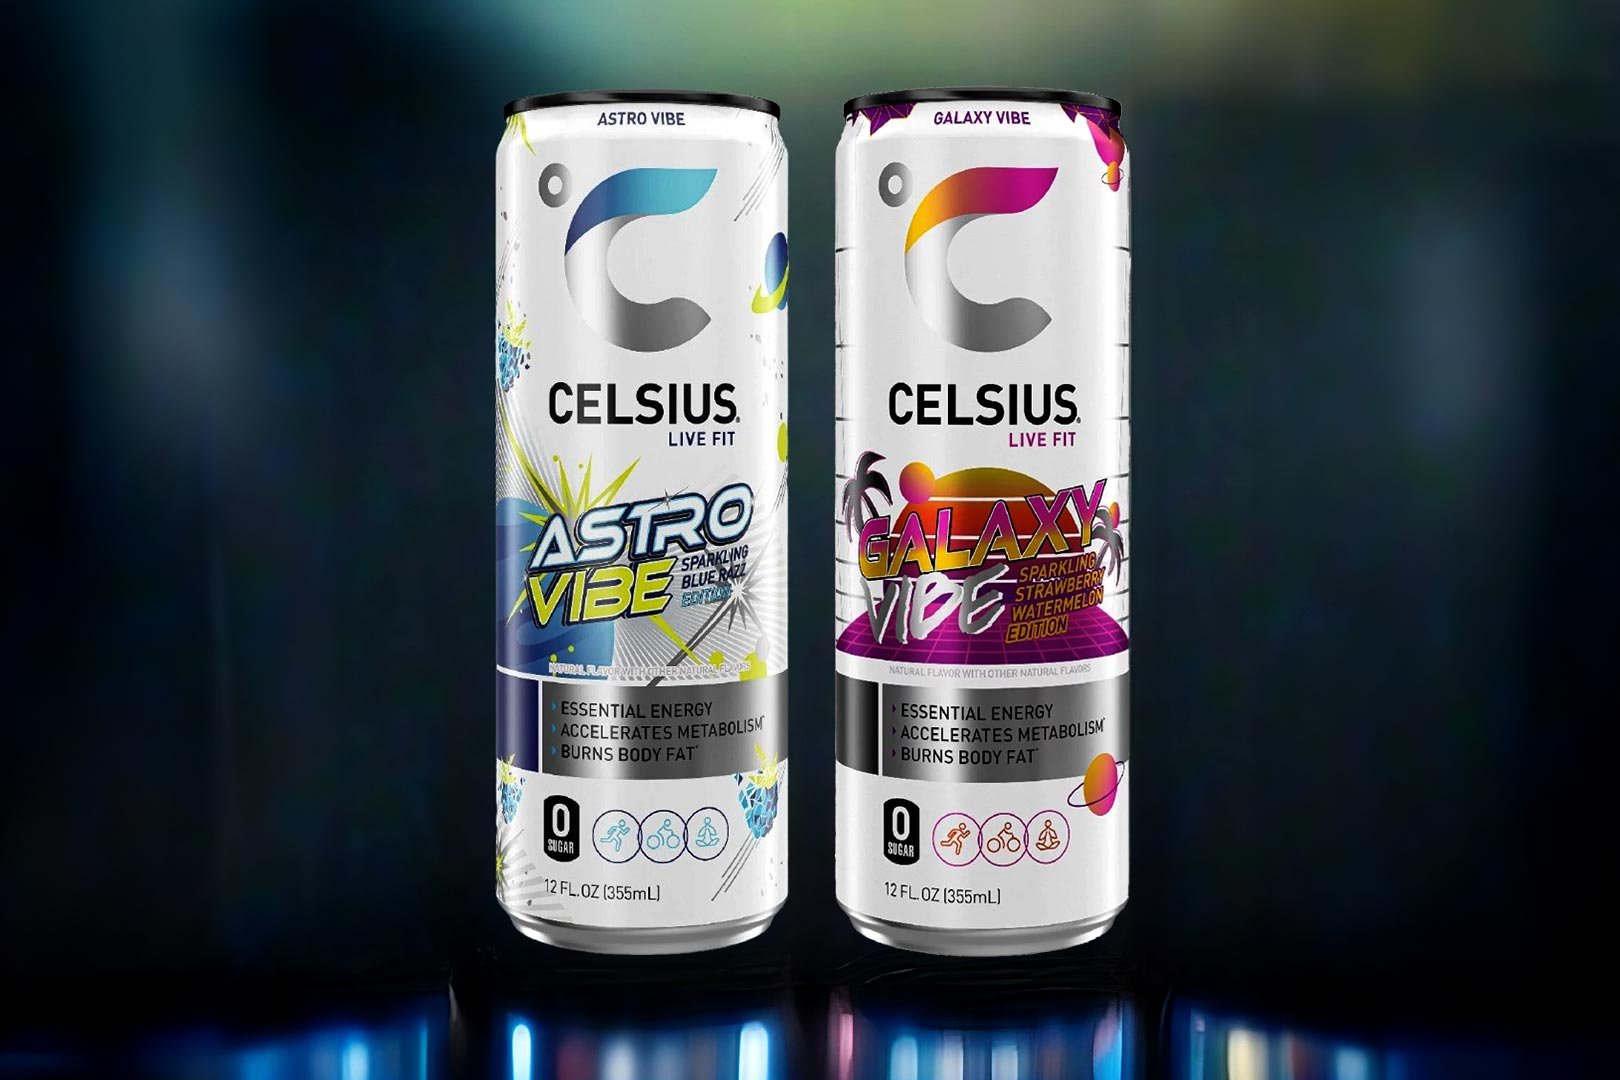 Upcoming Celsius Astro Vibe and Galaxy Vibe energy drink flavors